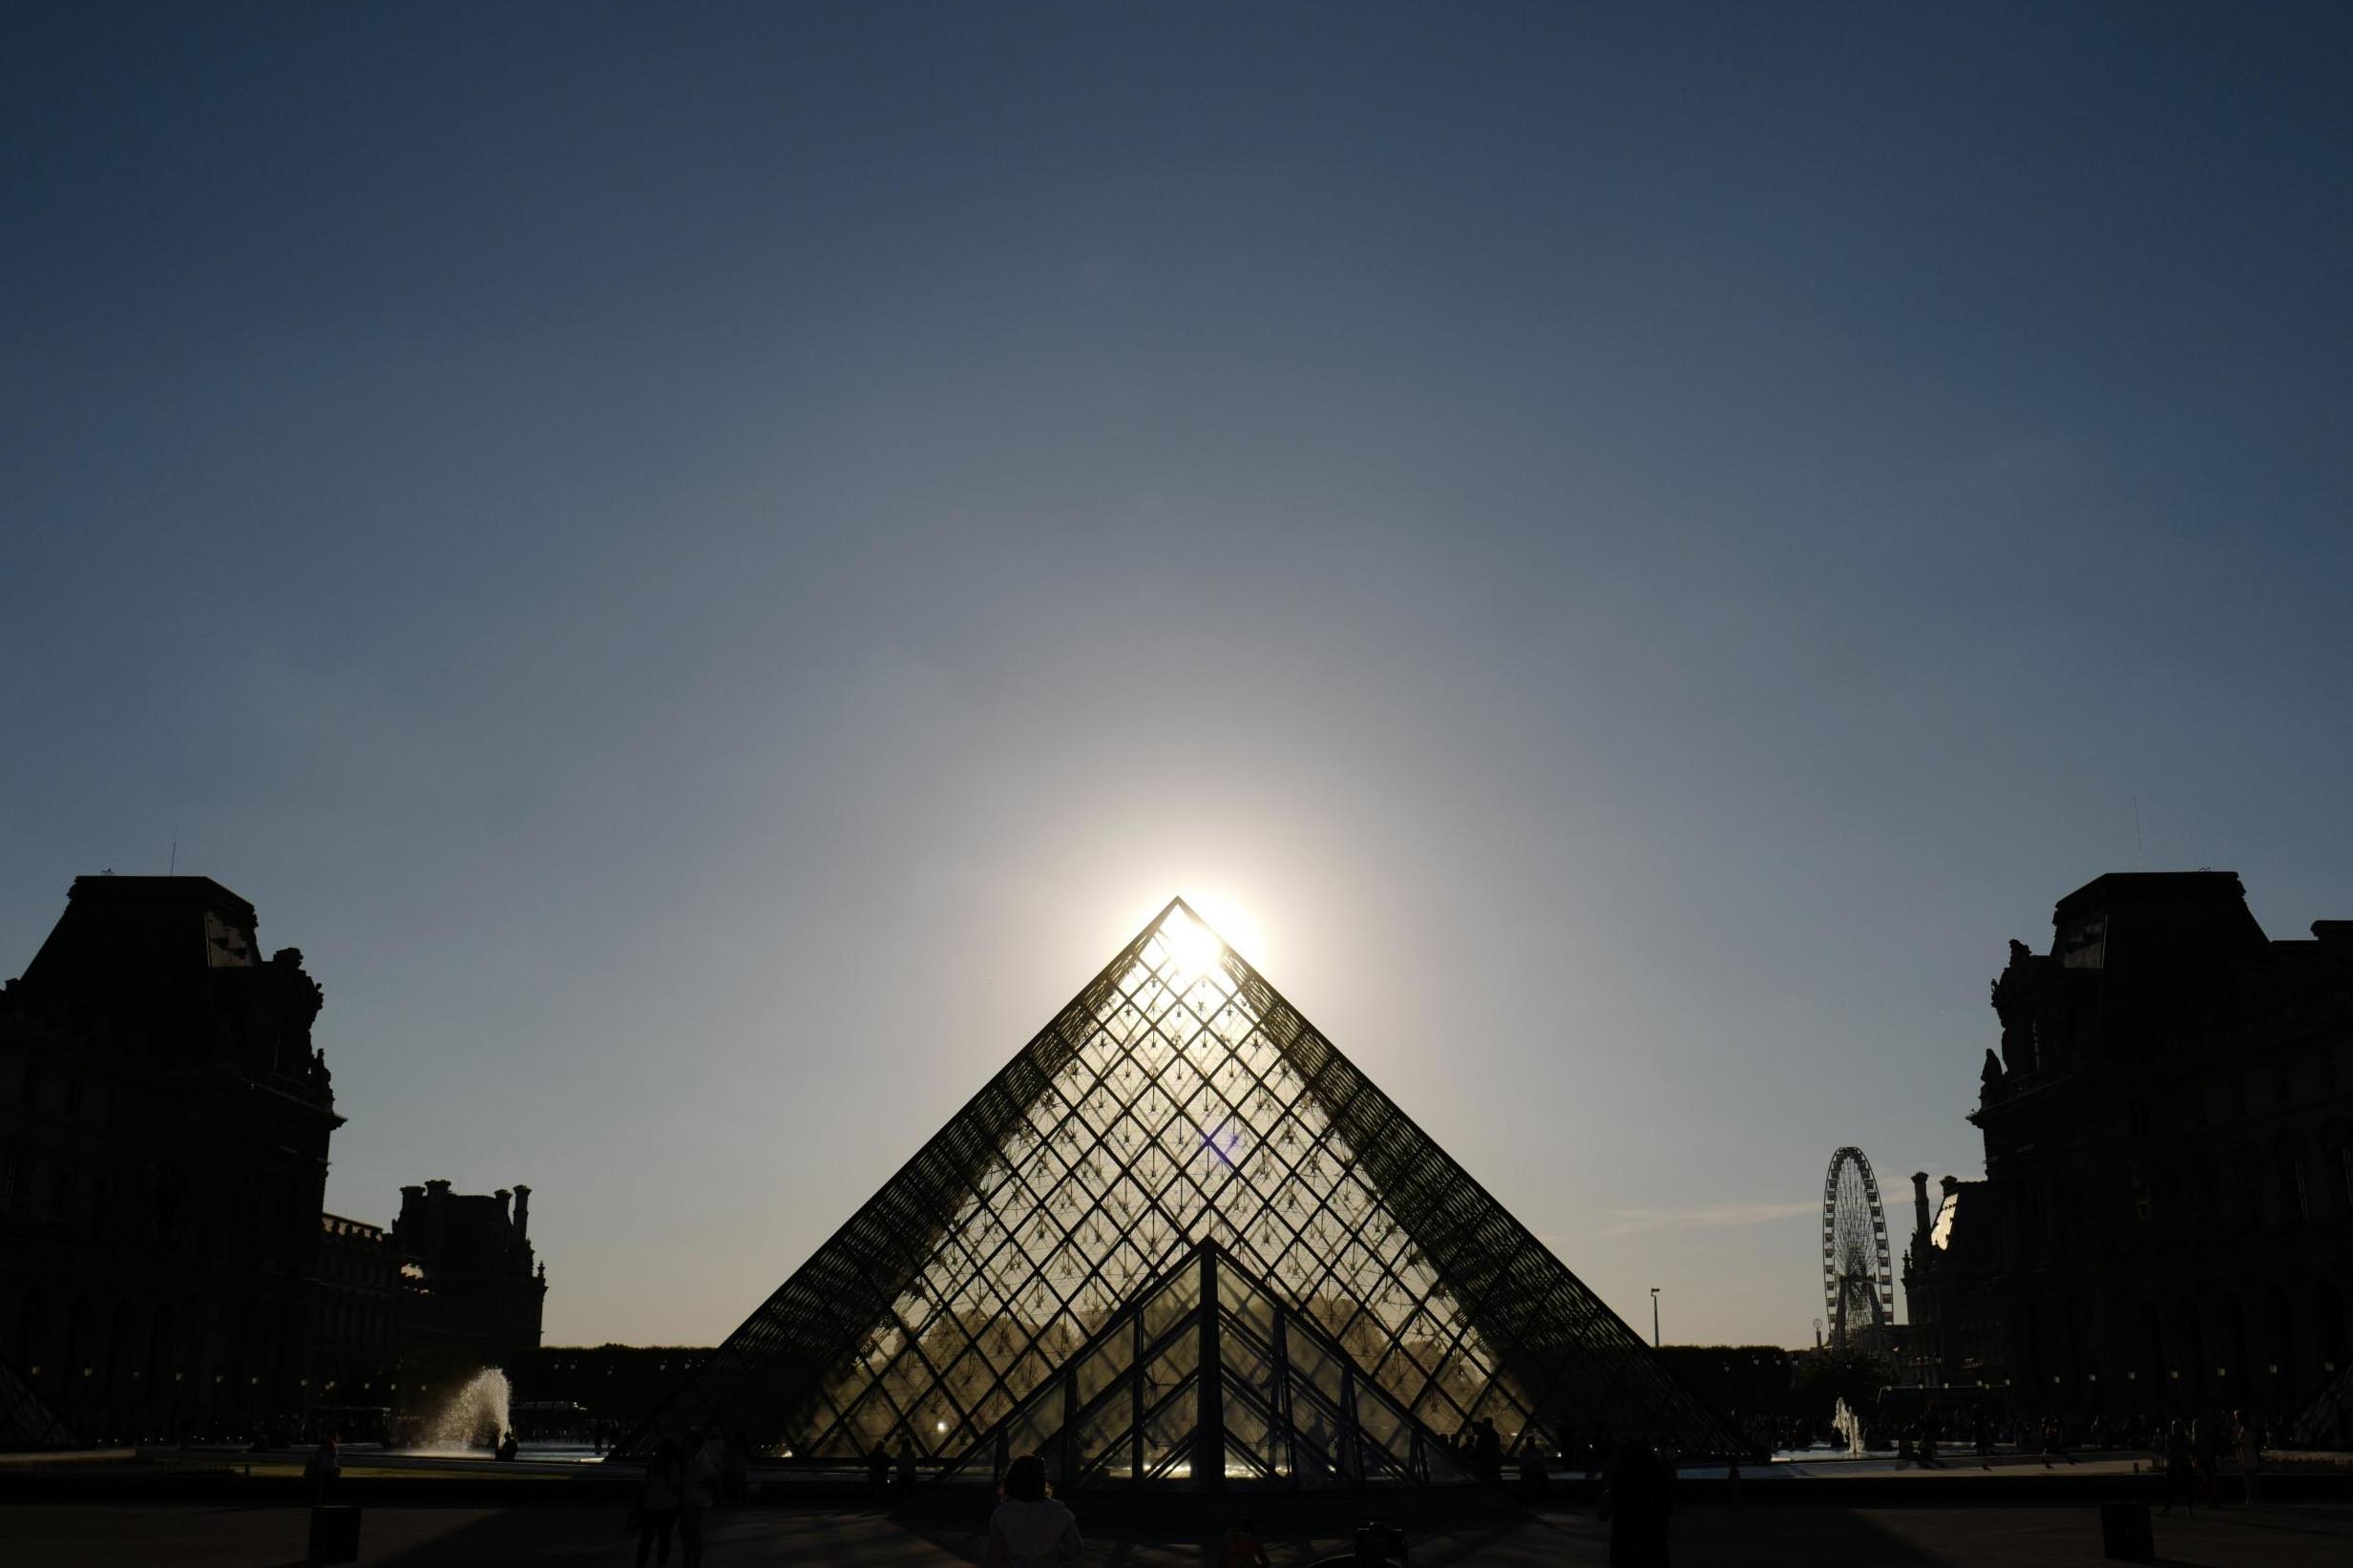 Louvre museum removes name of Sackler family linked to opioid crisis